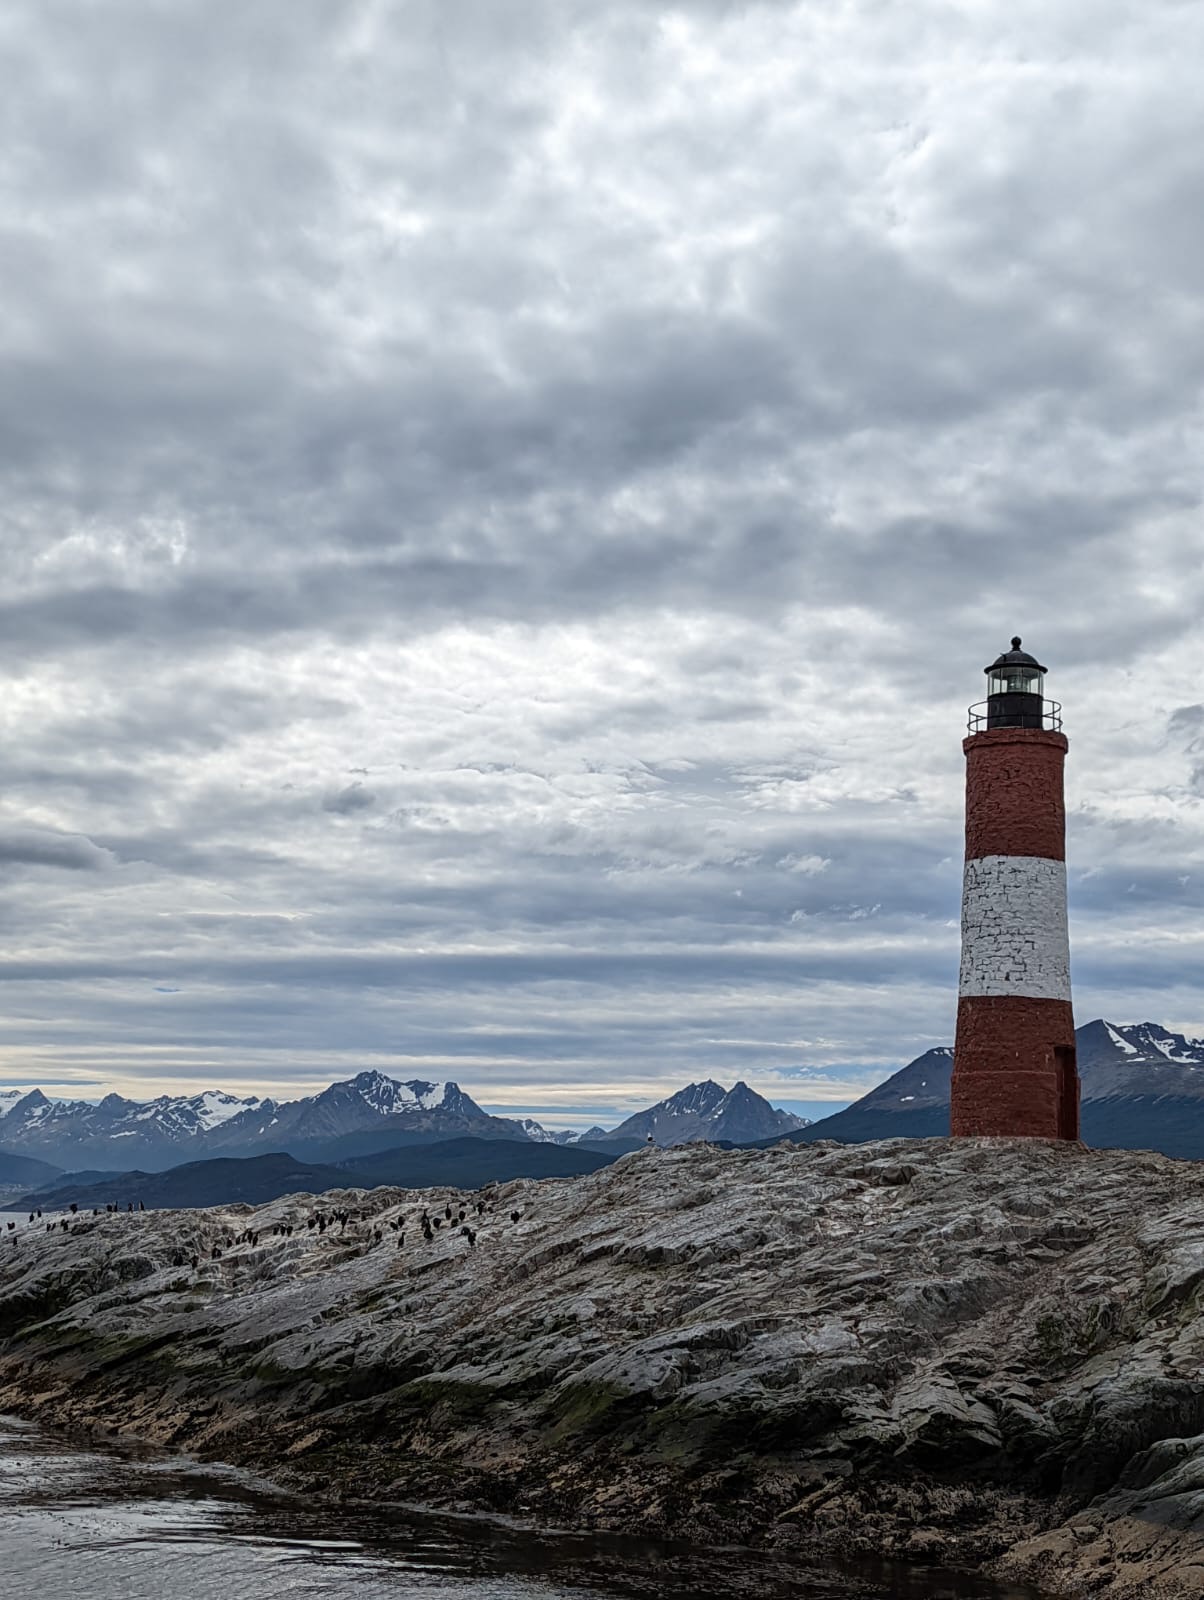 VIP TOURS BA - Experiences in Argentina - Ushuaia - The lighthouse of the end of the world